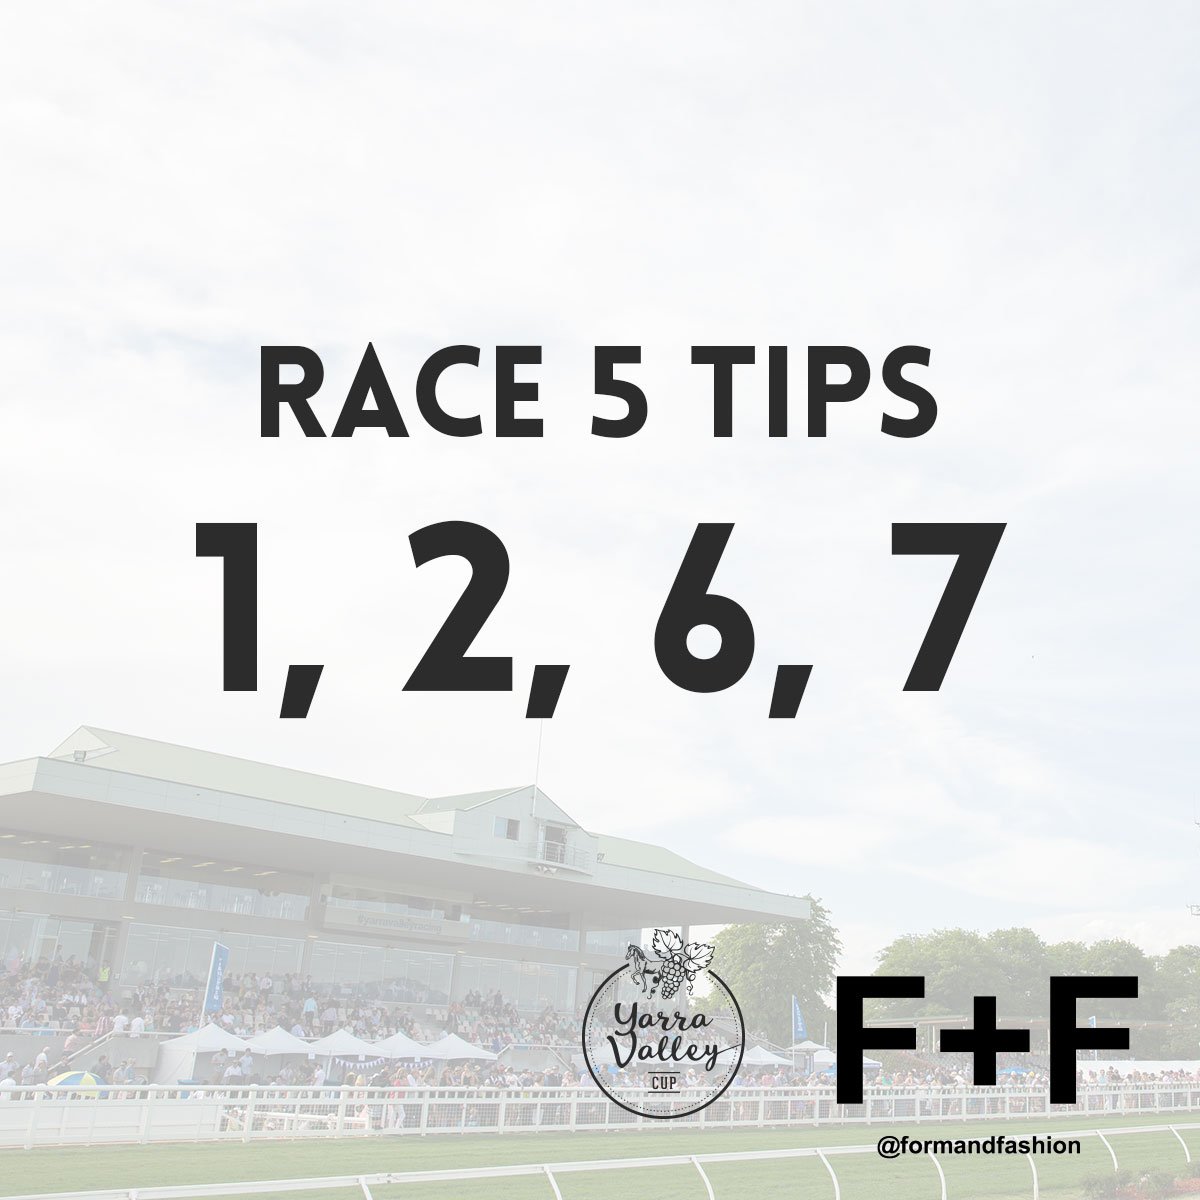 #YVCup Tips for Race 5: 1, 2, 6, 7